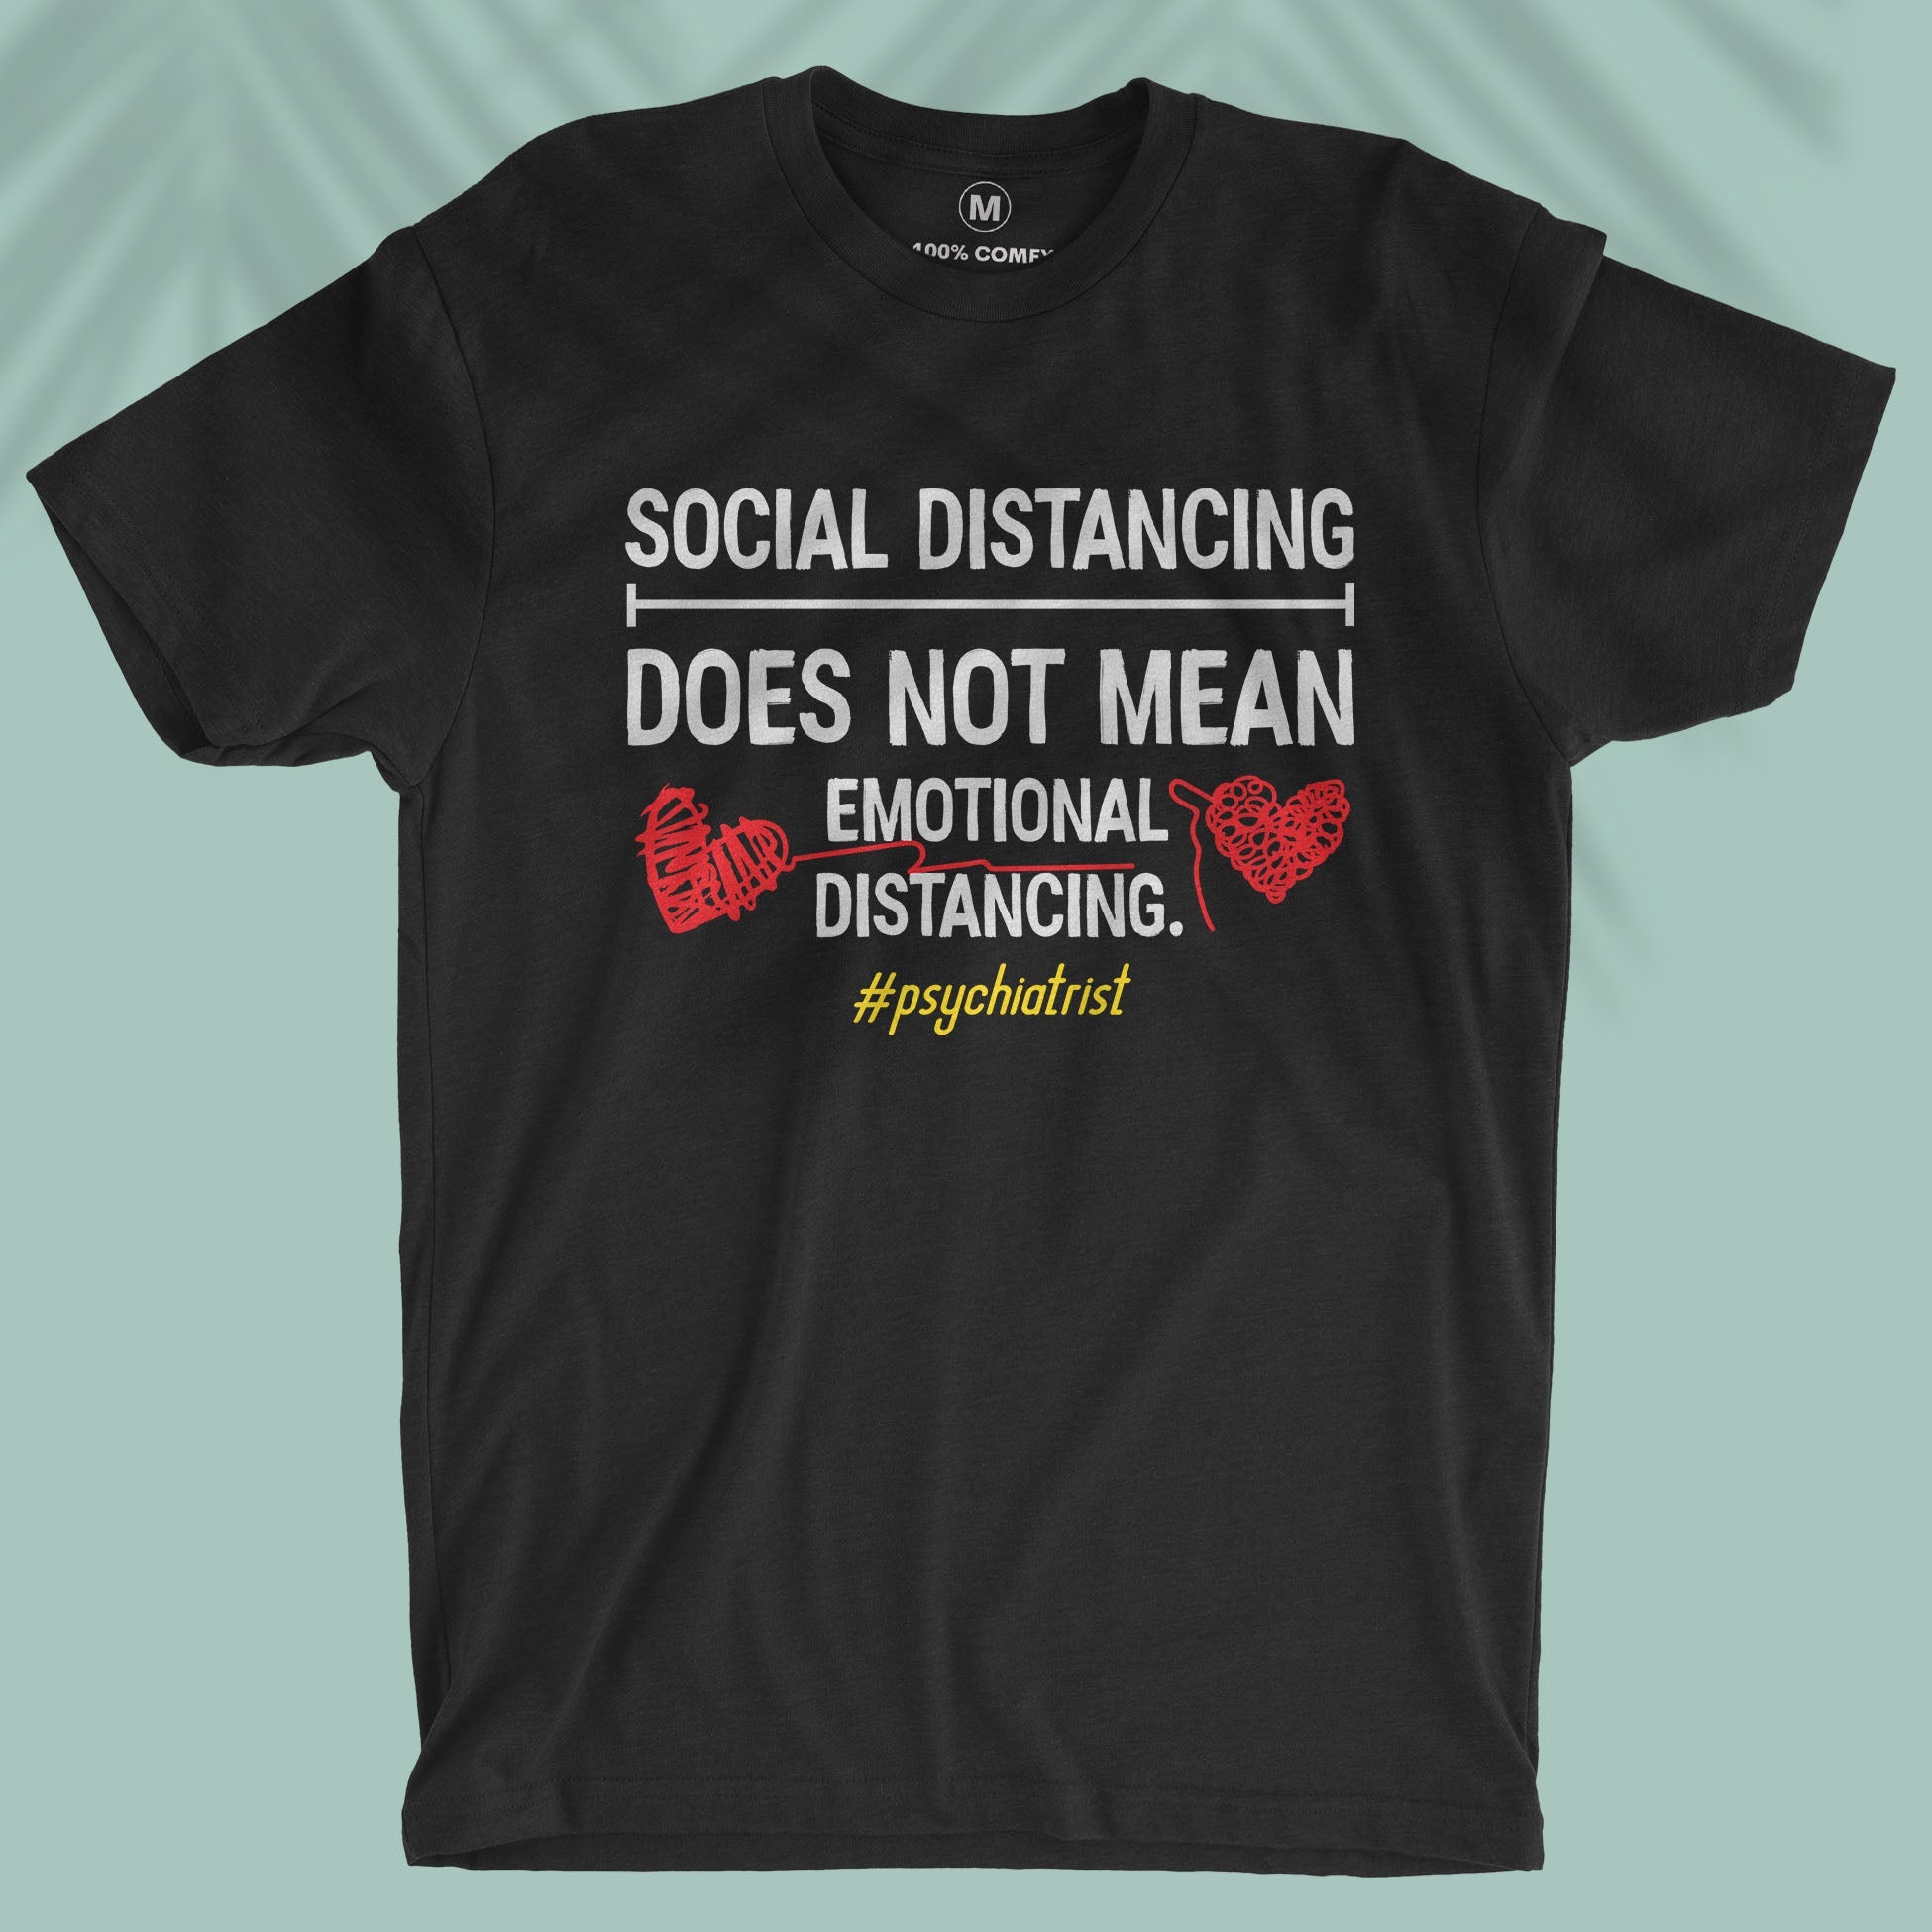 Social Distancing Does Not Mean Emotional Distancing - Unisex T-shirt